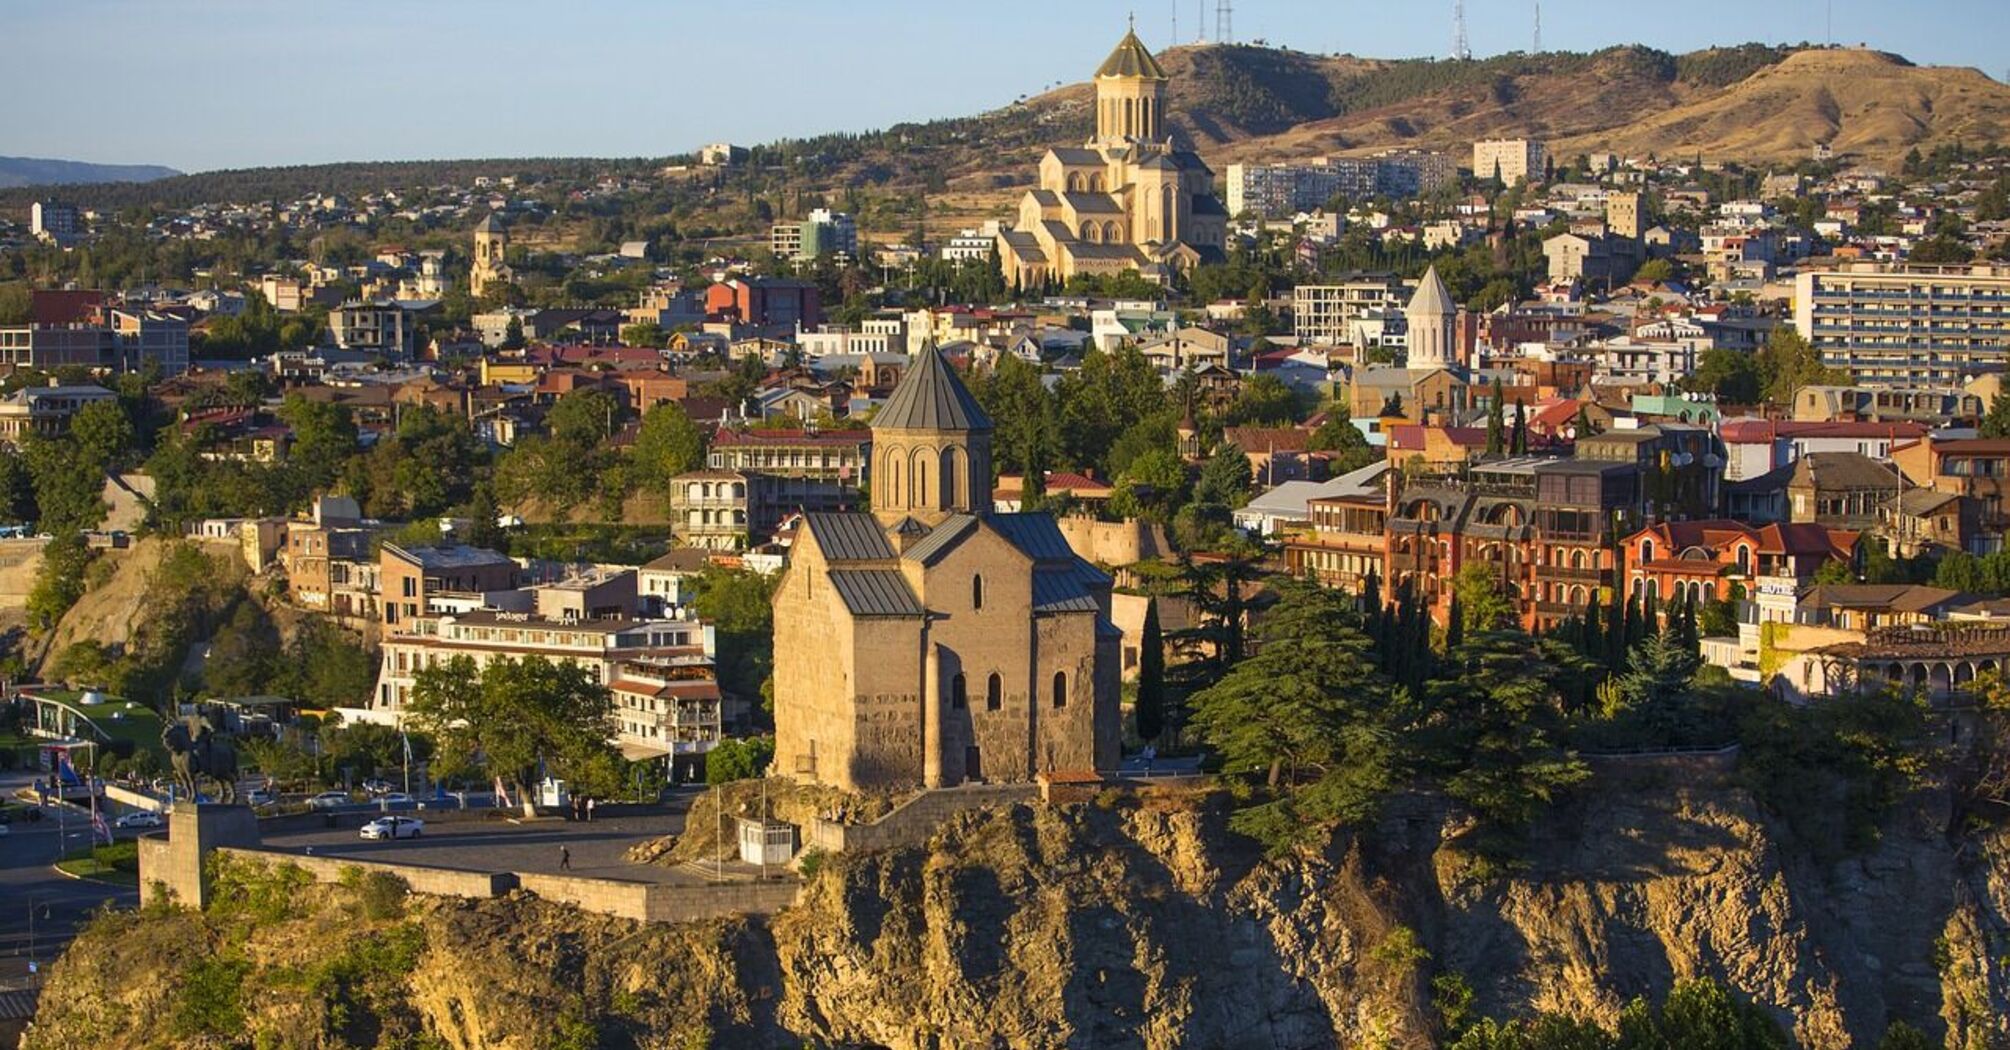 Antiquity and modernity: Tbilisi is a real gem for New Year's travels